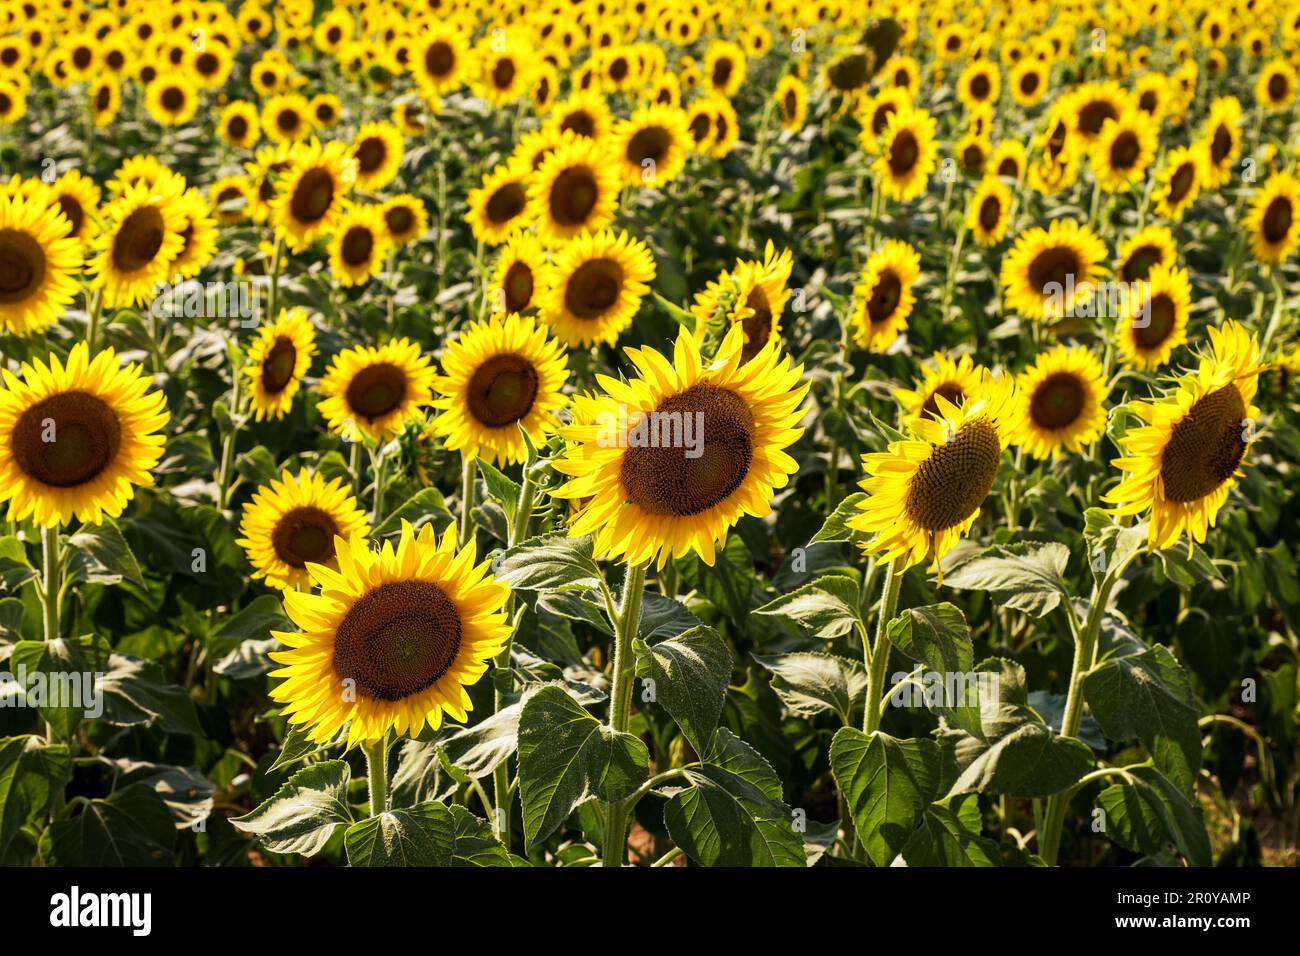 Many bright yellow blooming sunflowers with green leaves growing in countryside field on sunny day Stock Photo